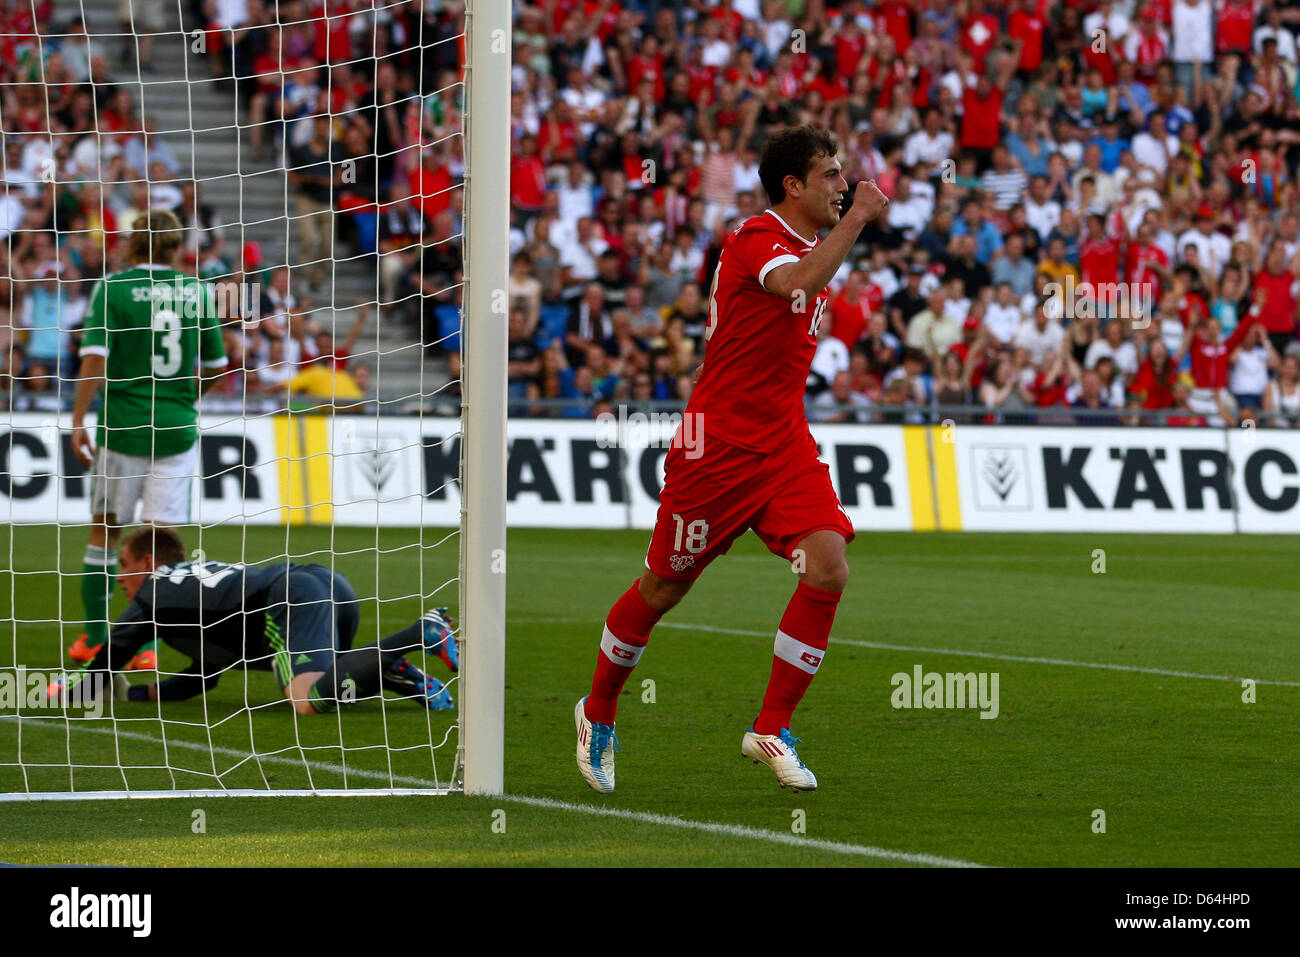 Switzerland's Admir Mehmedi celebrates the 3-1 goal during the international friendly soccer match between Switzerland and Germany at St. Jakob Park in Basel, Switzerland, 26 May 2012. Photo: Revierfoto Stock Photo